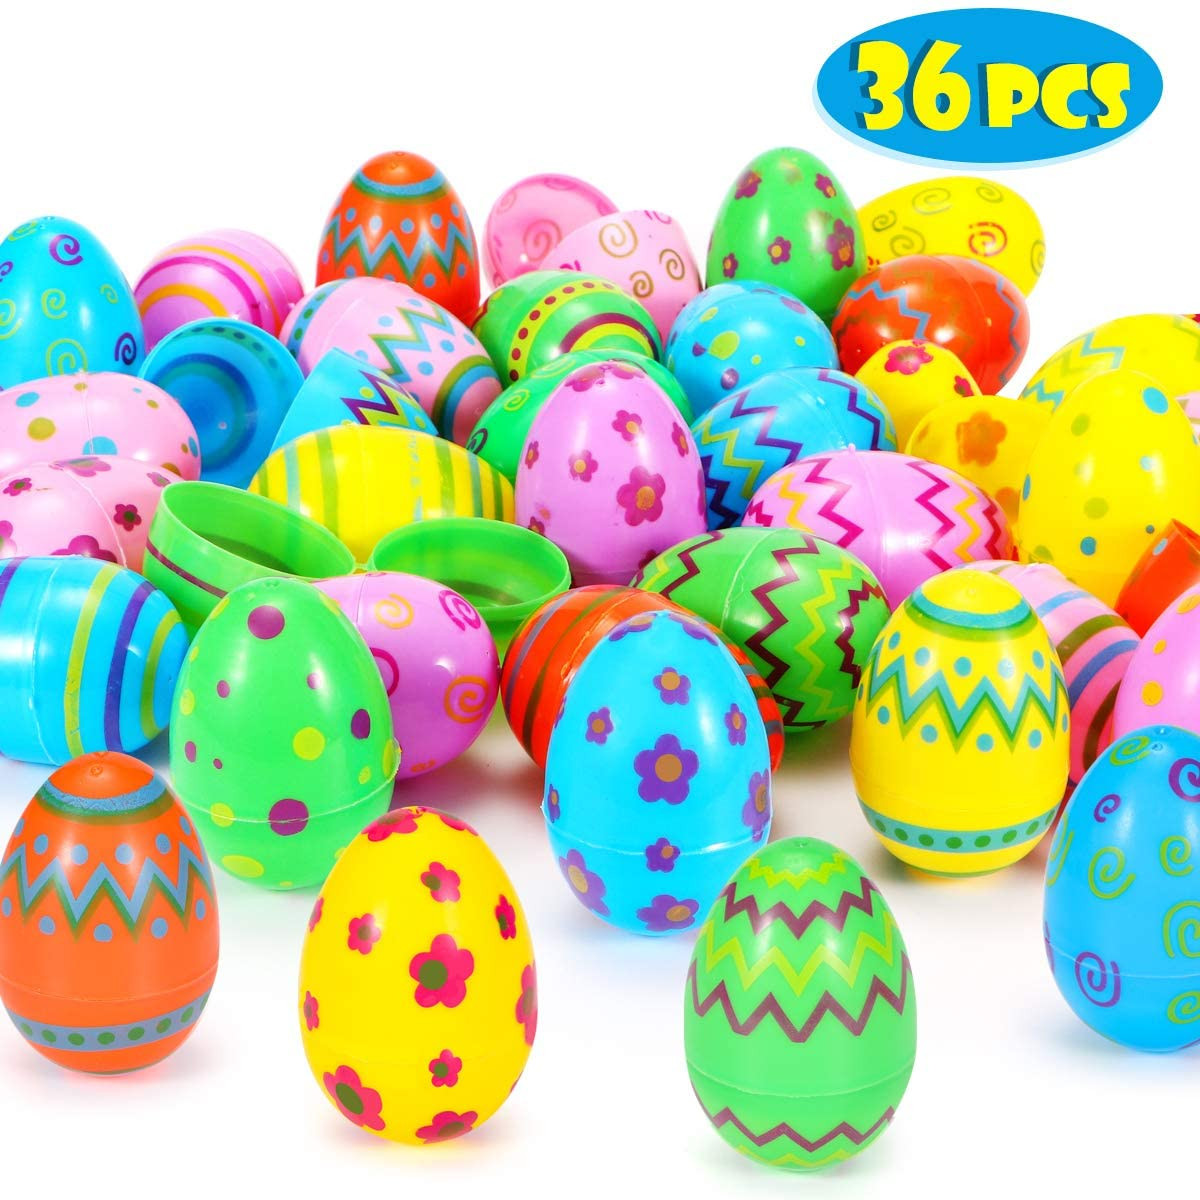 Party City Easter Eggs
 TOYIFY 36 Pcs Plastic Easter Eggs 3 Printed Bright